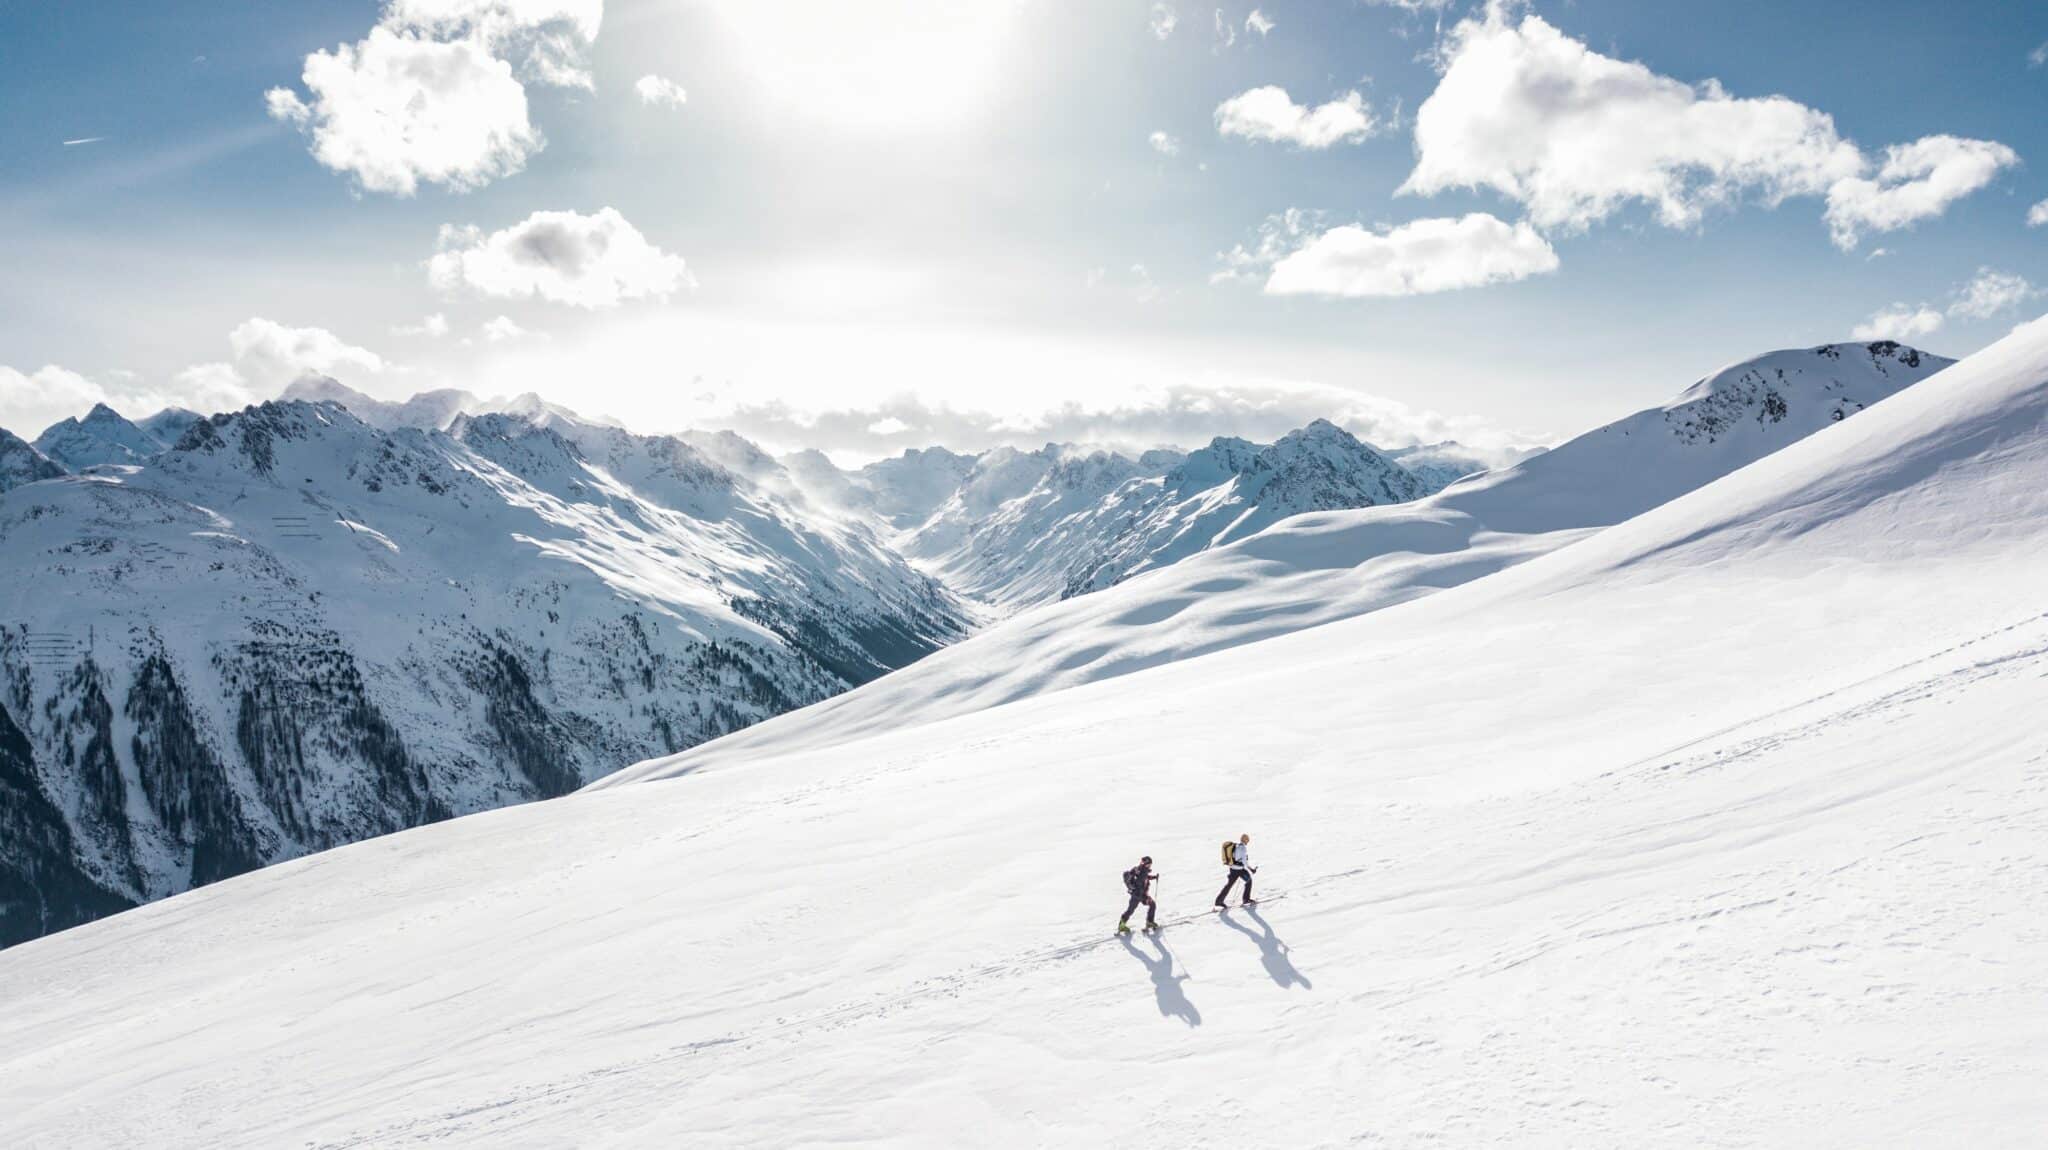 The Top 10 Most Desirable Ski Resorts In The World For The Year 2022